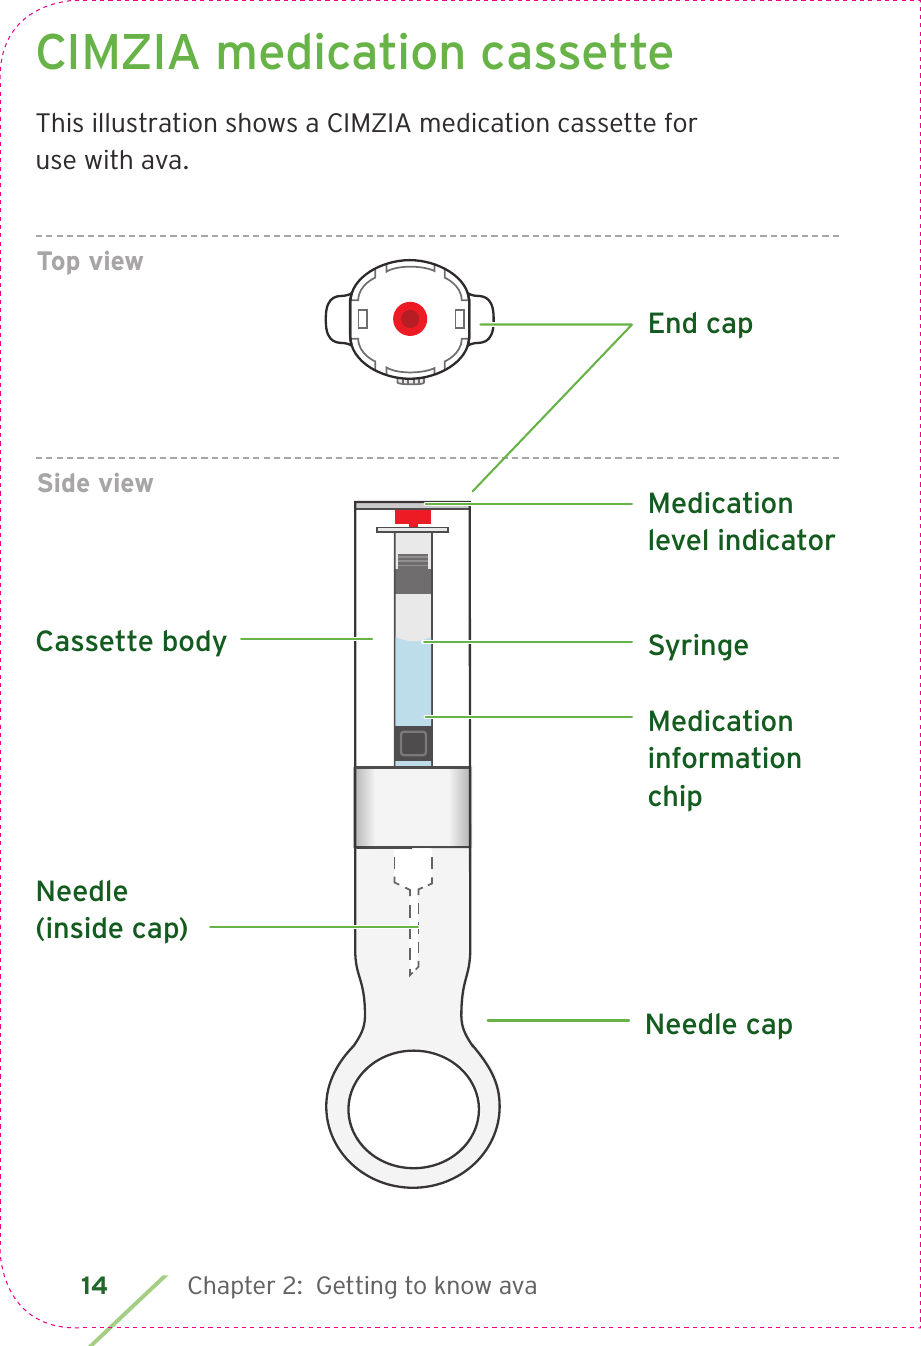 14 Chapter 2:  Getting to know avaCIMZIA medication cassetteThis illustration shows a CIMZIA medication cassette for use with ava.Needle capSyringeMedication information chipSide viewTop viewMedication level indicatorEnd capCassette bodyNeedle (inside cap)